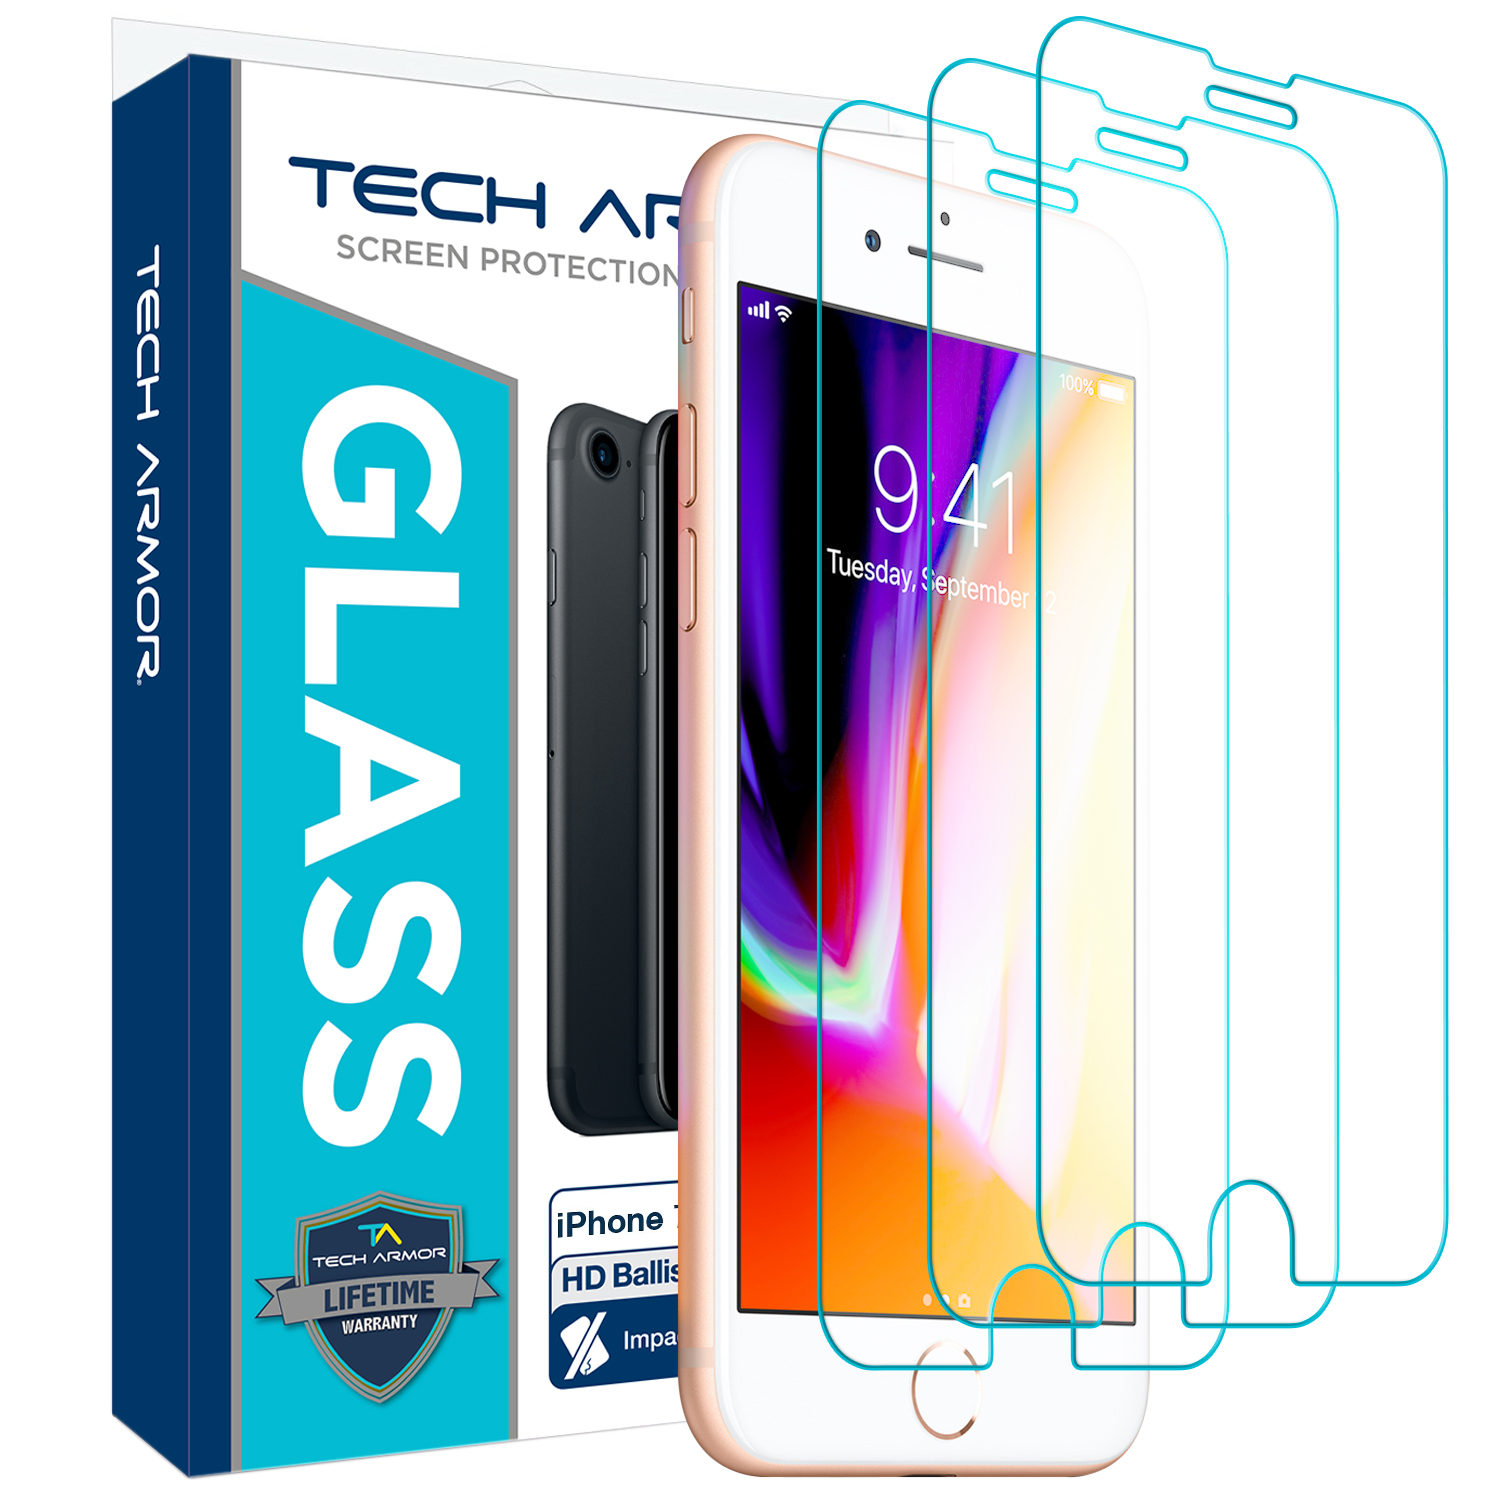 Tech Armor Ballistic Glass Screen Protector Designed for Apple iPhone Plus, 6s Plus, iPhone 7 and iPhone 8 Plus Tempered 3 Pack